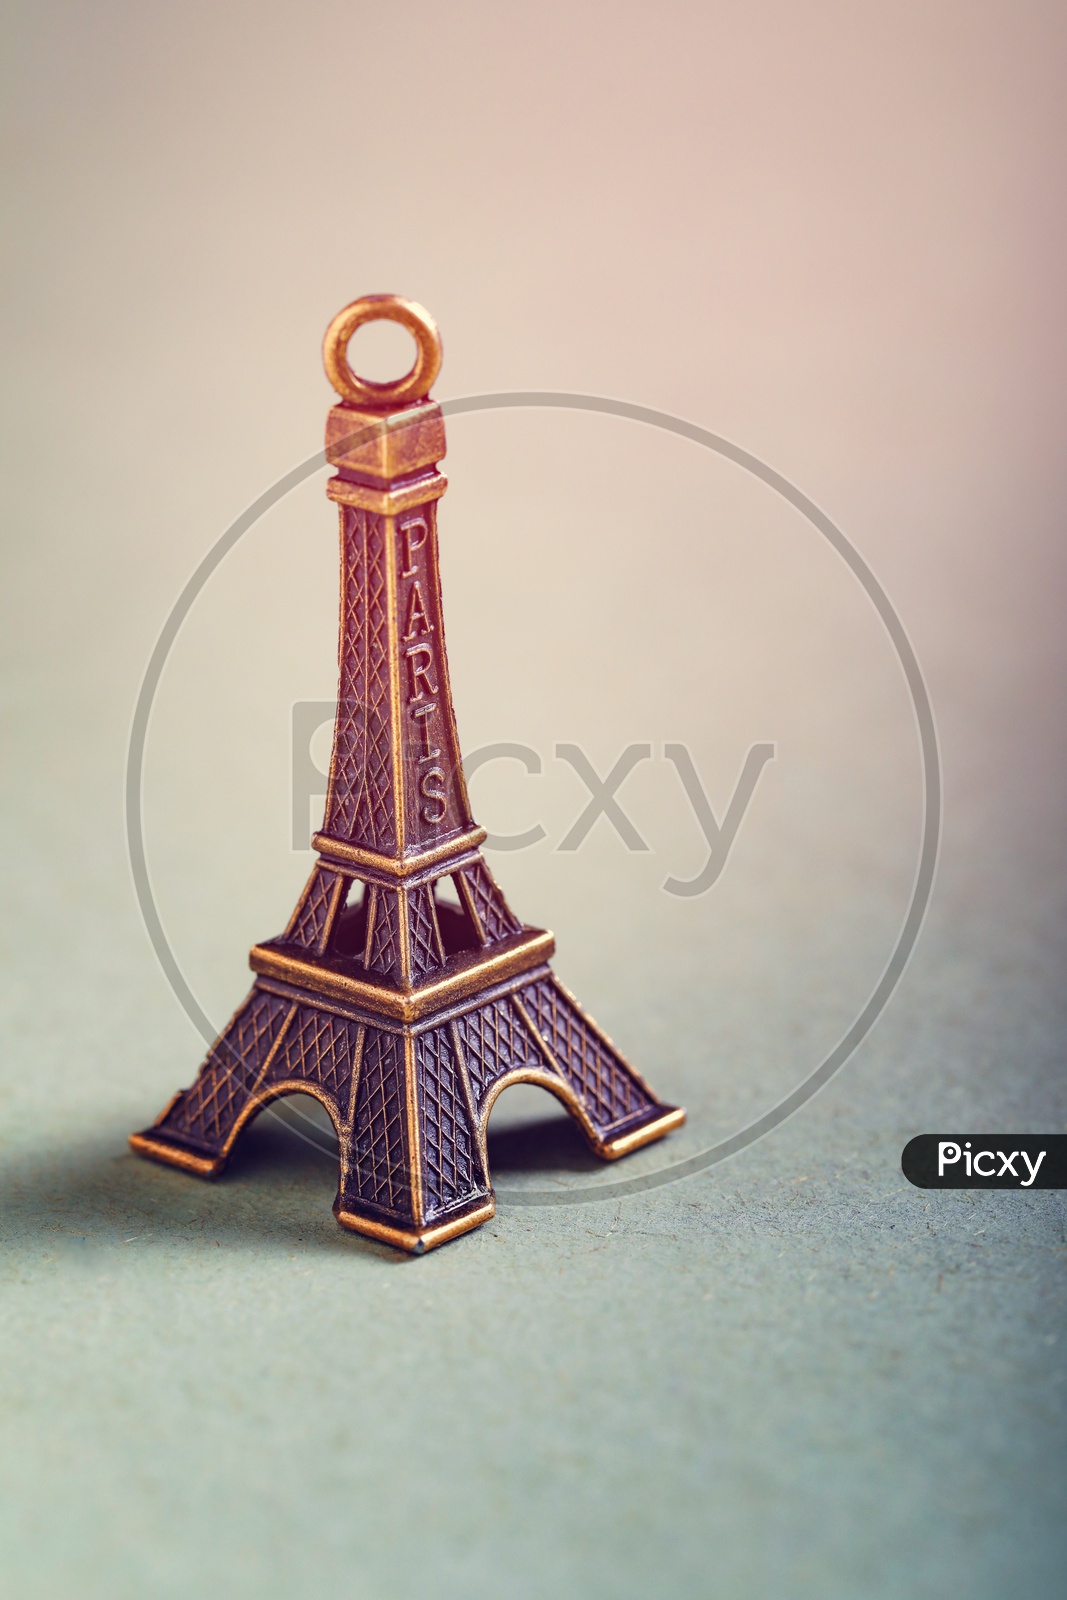 Eiffel Tower Miniature  on an Isolated White Background